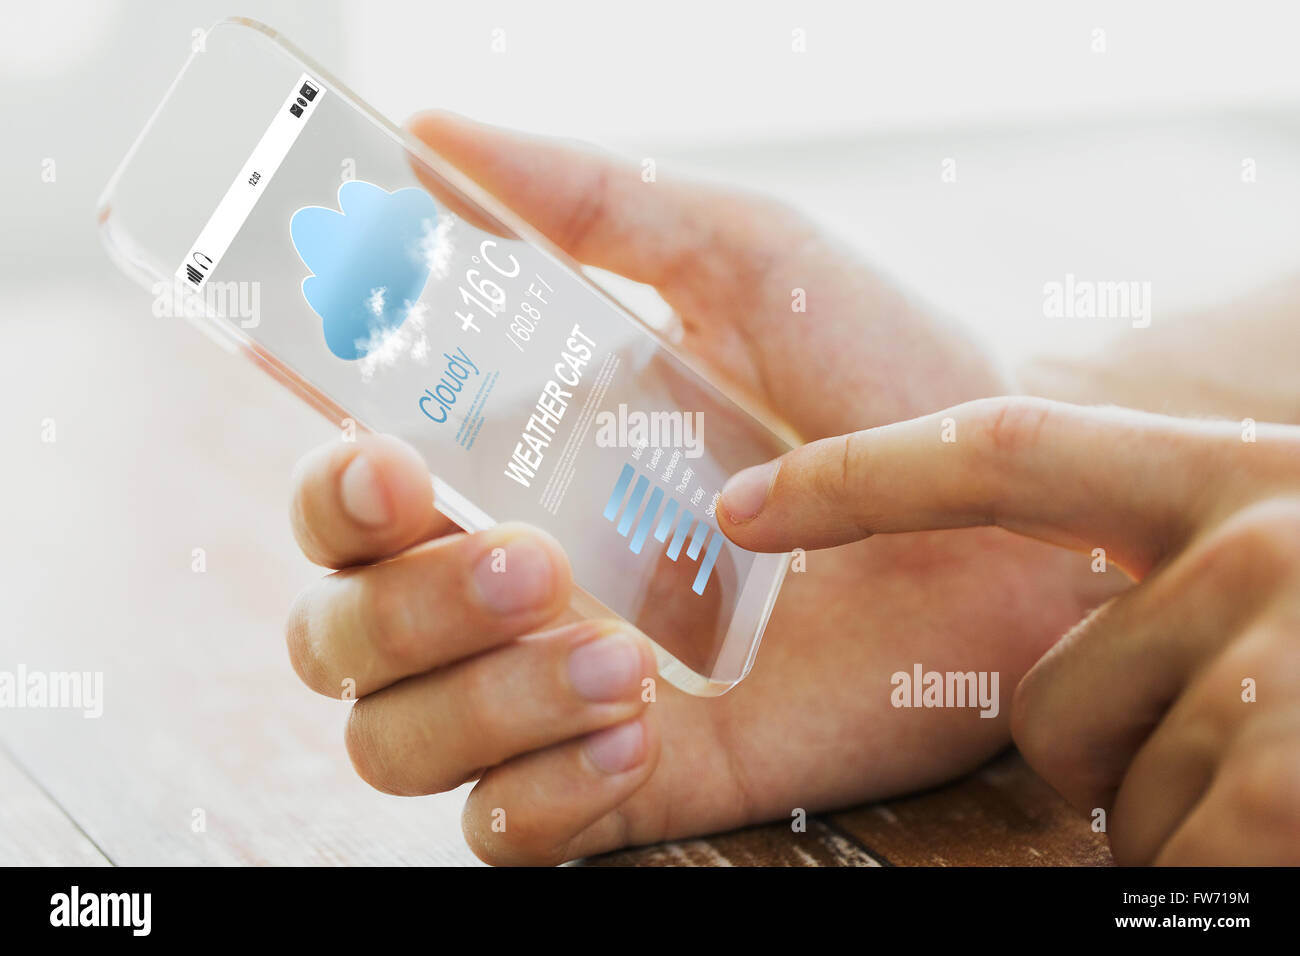 close up of male hand with weather cast smartphone Stock Photo